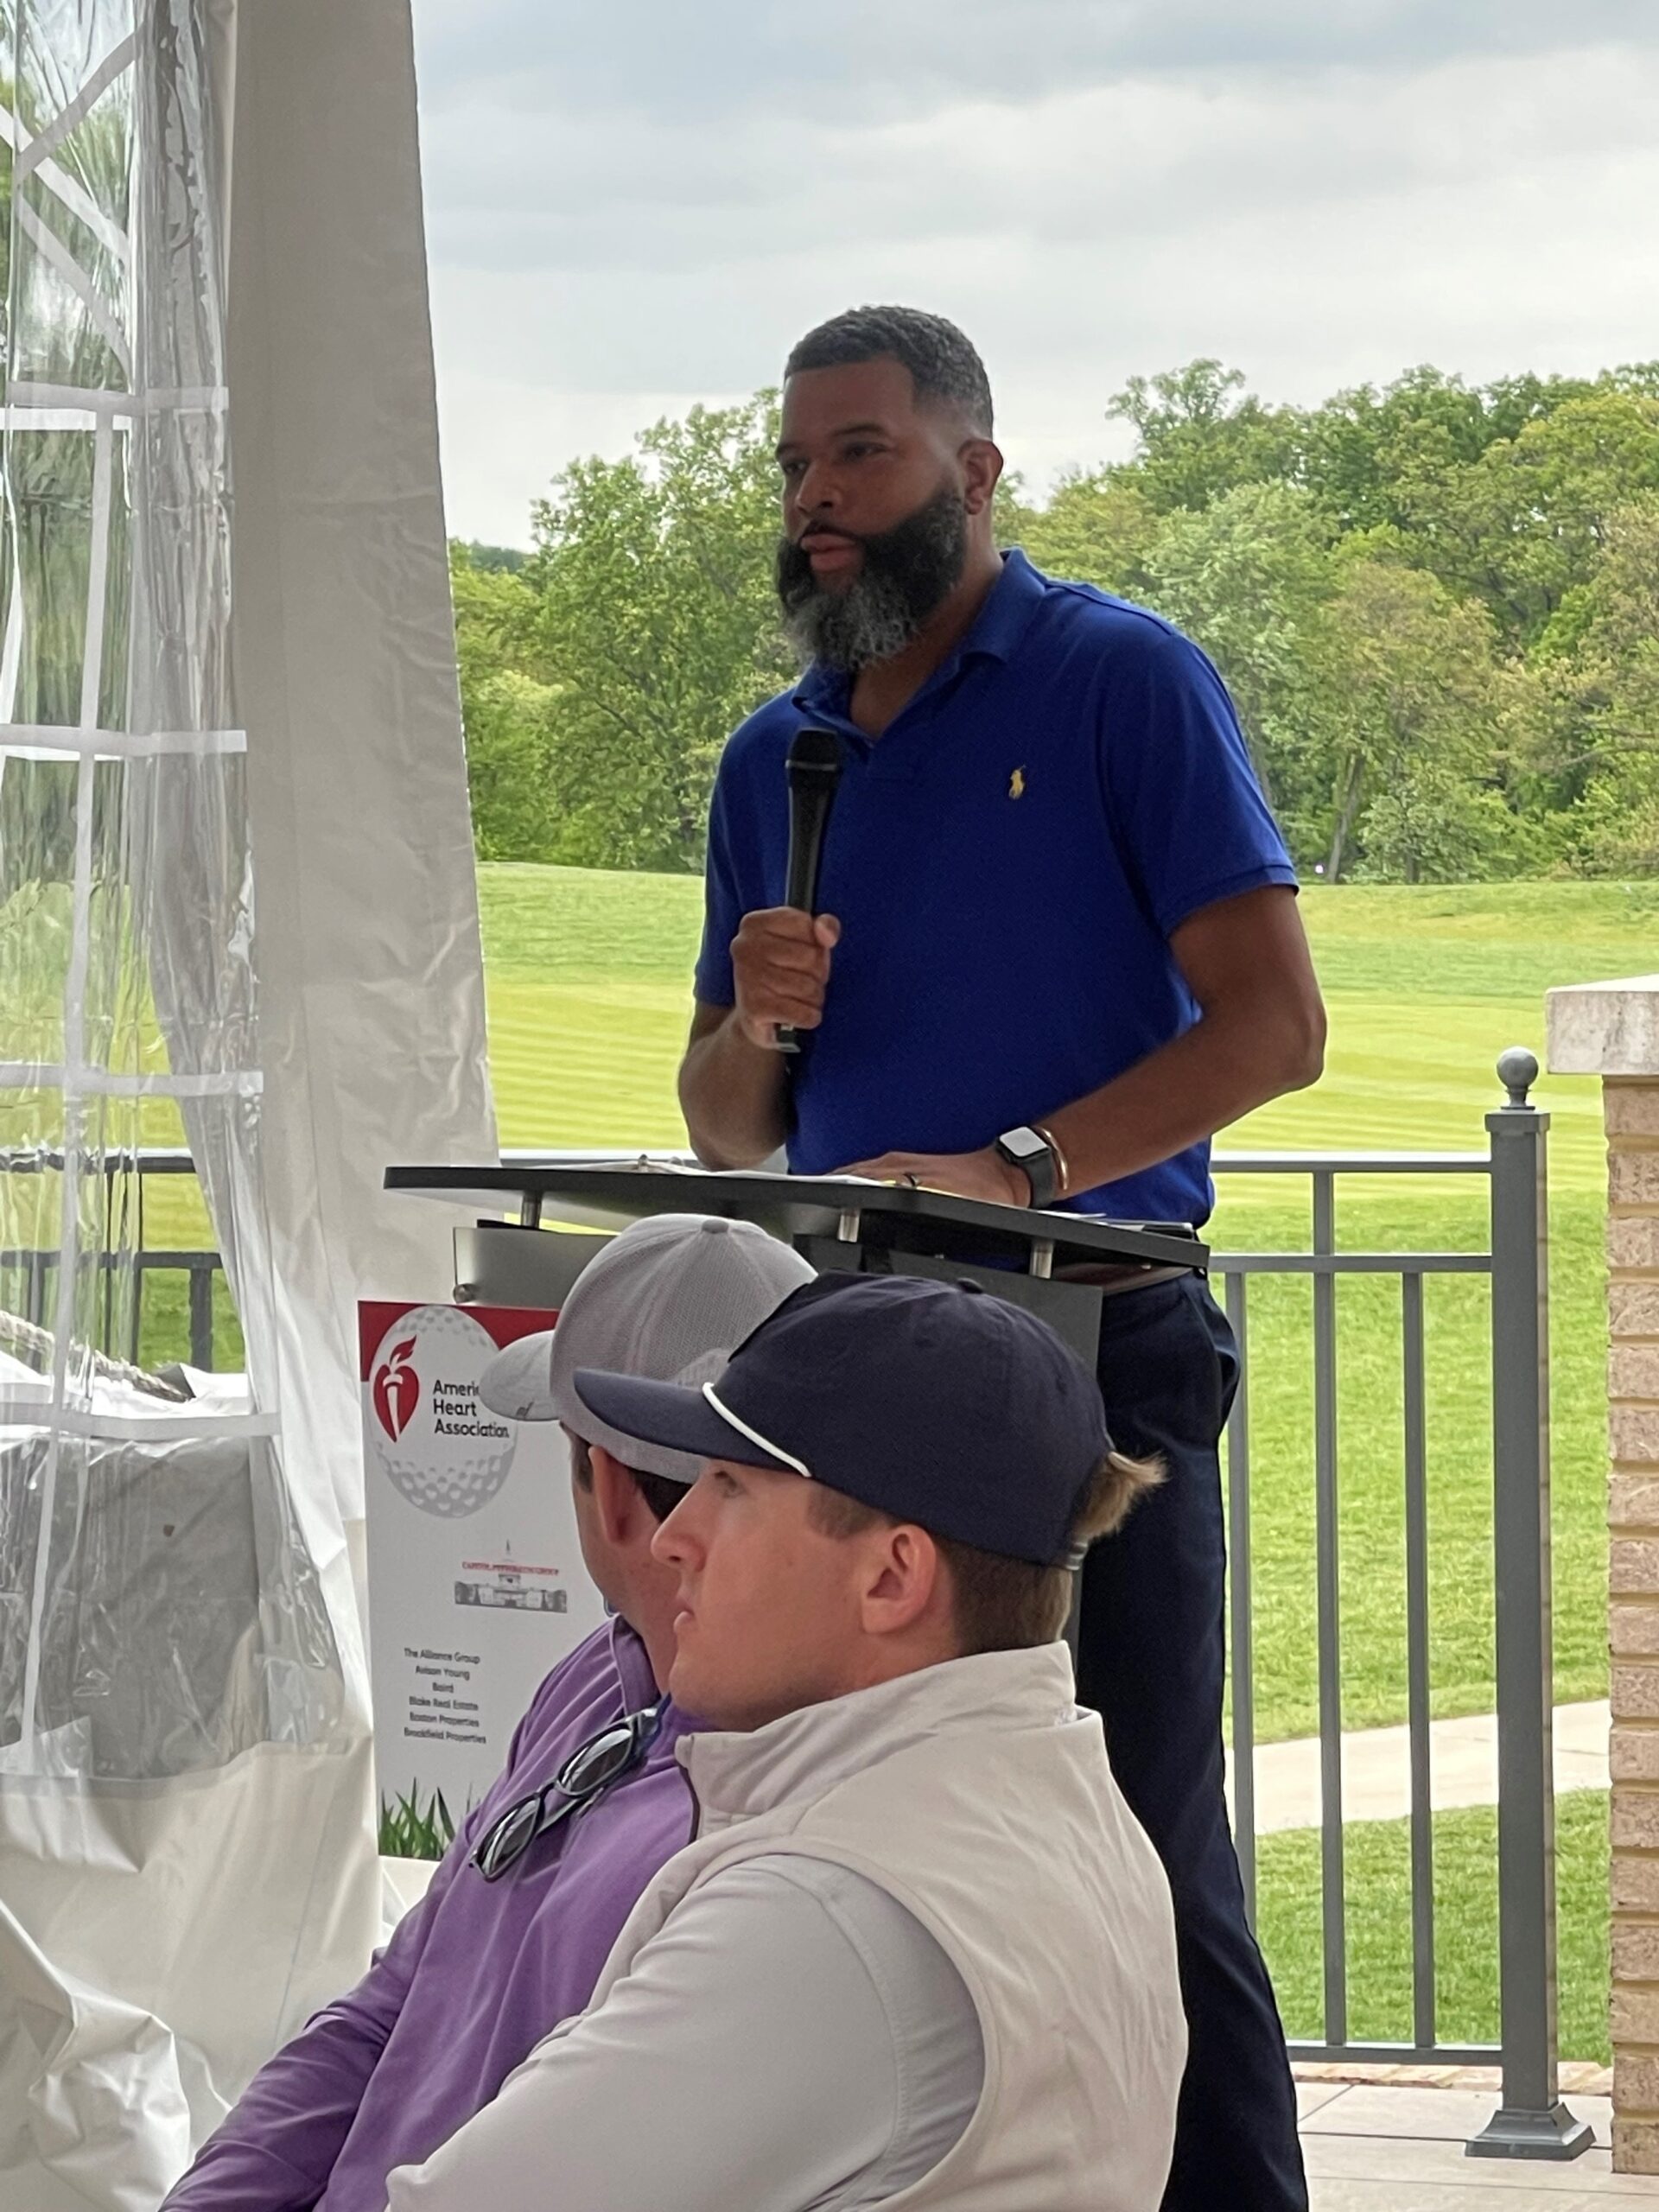 Greater Washington Region Golf Tournament Saves and Improves Lives One Swing at a Time